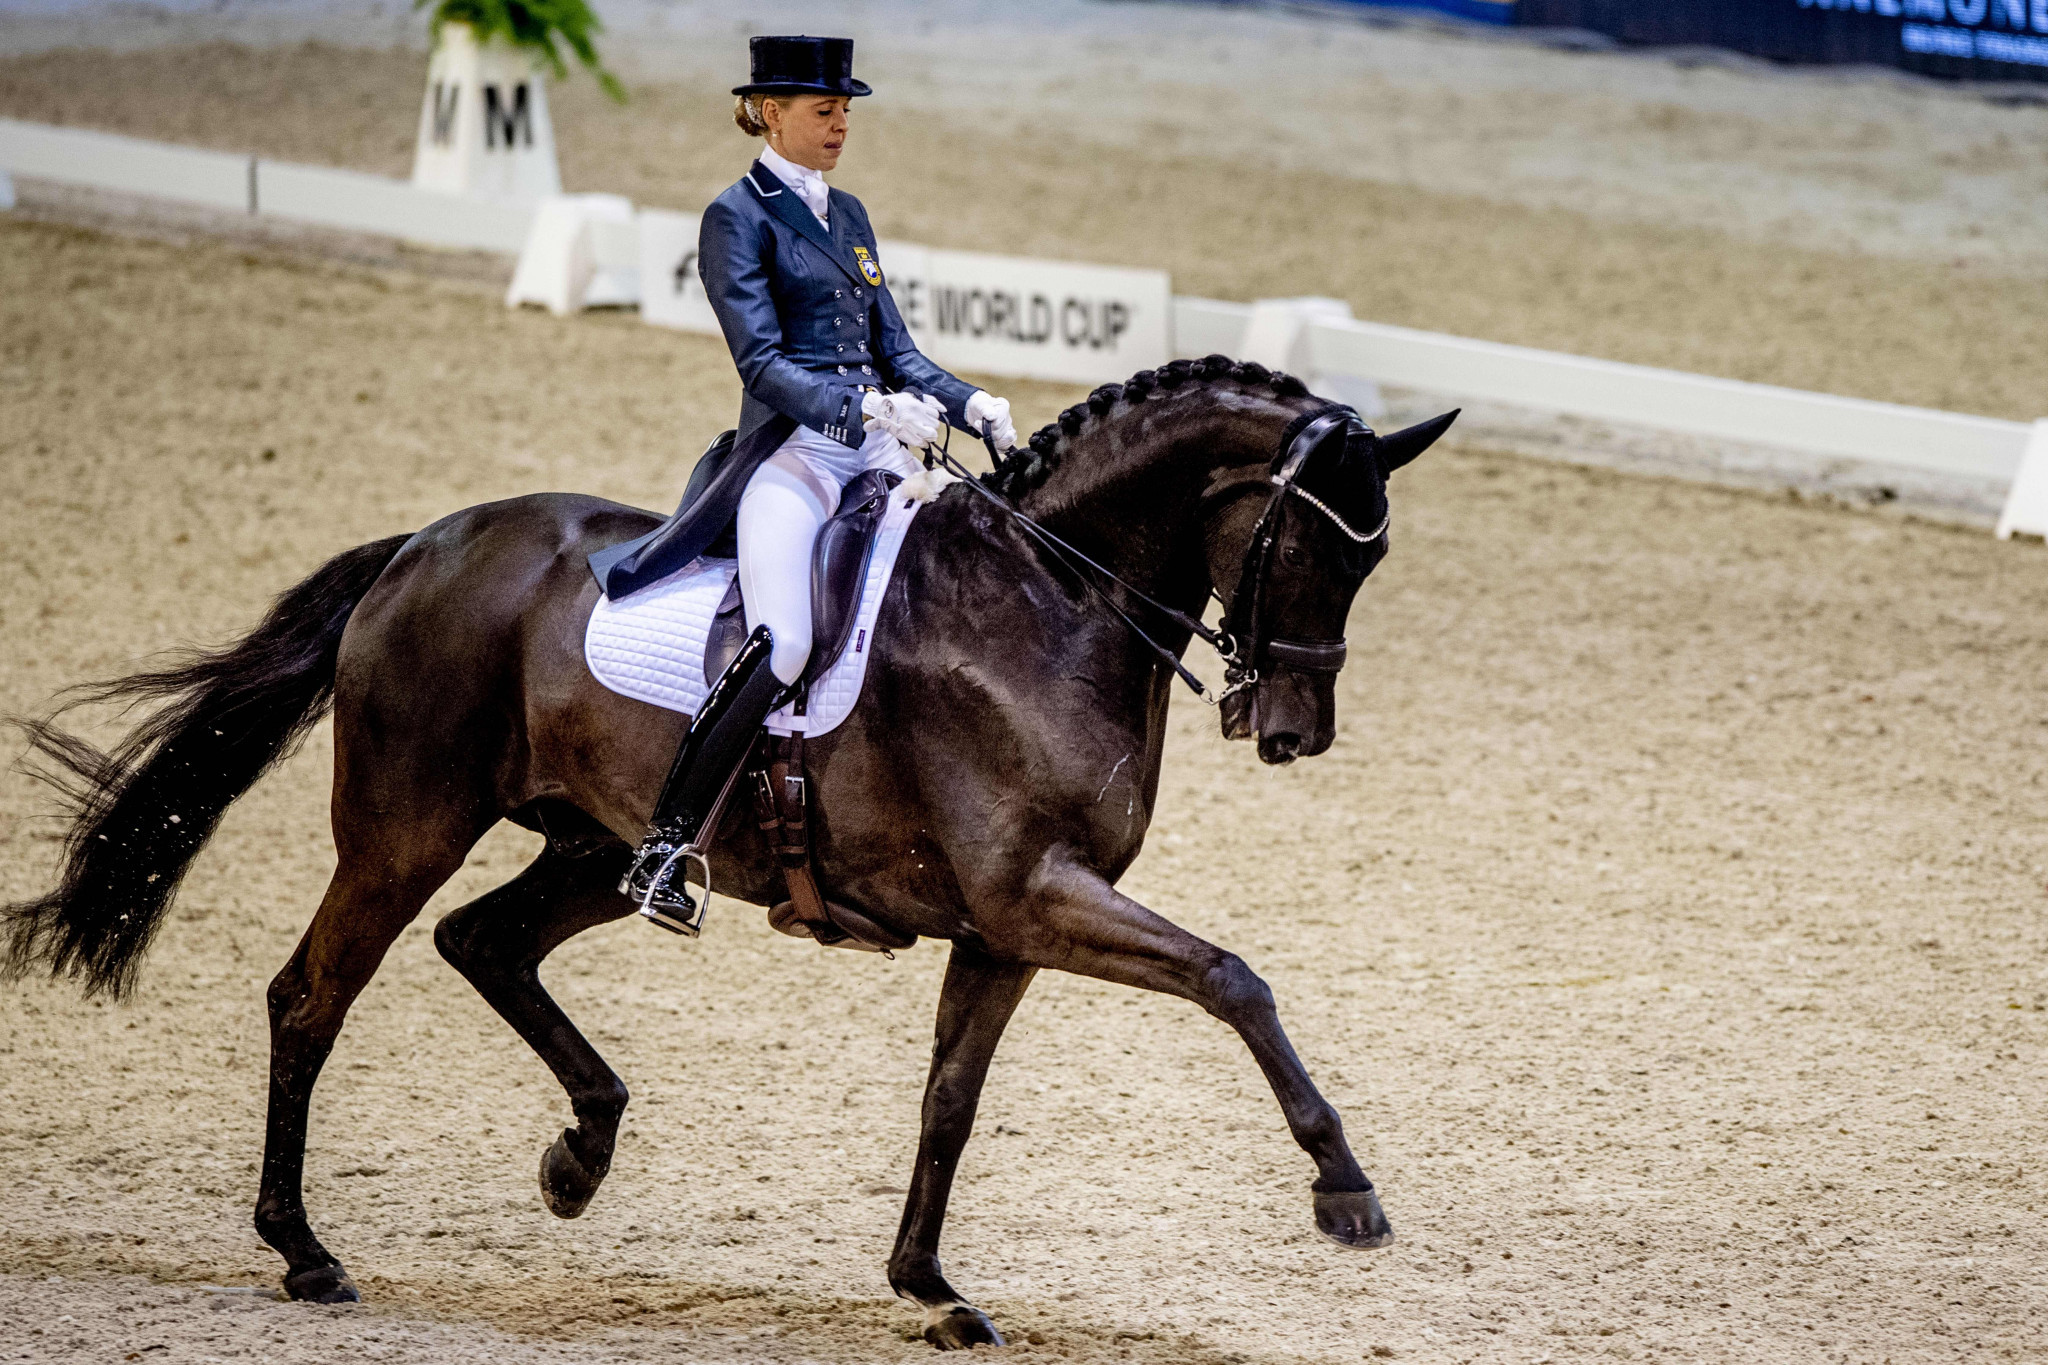  Sweden seek to maintain overall lead as FEI Dressage Nations Cup moves on to Aachen